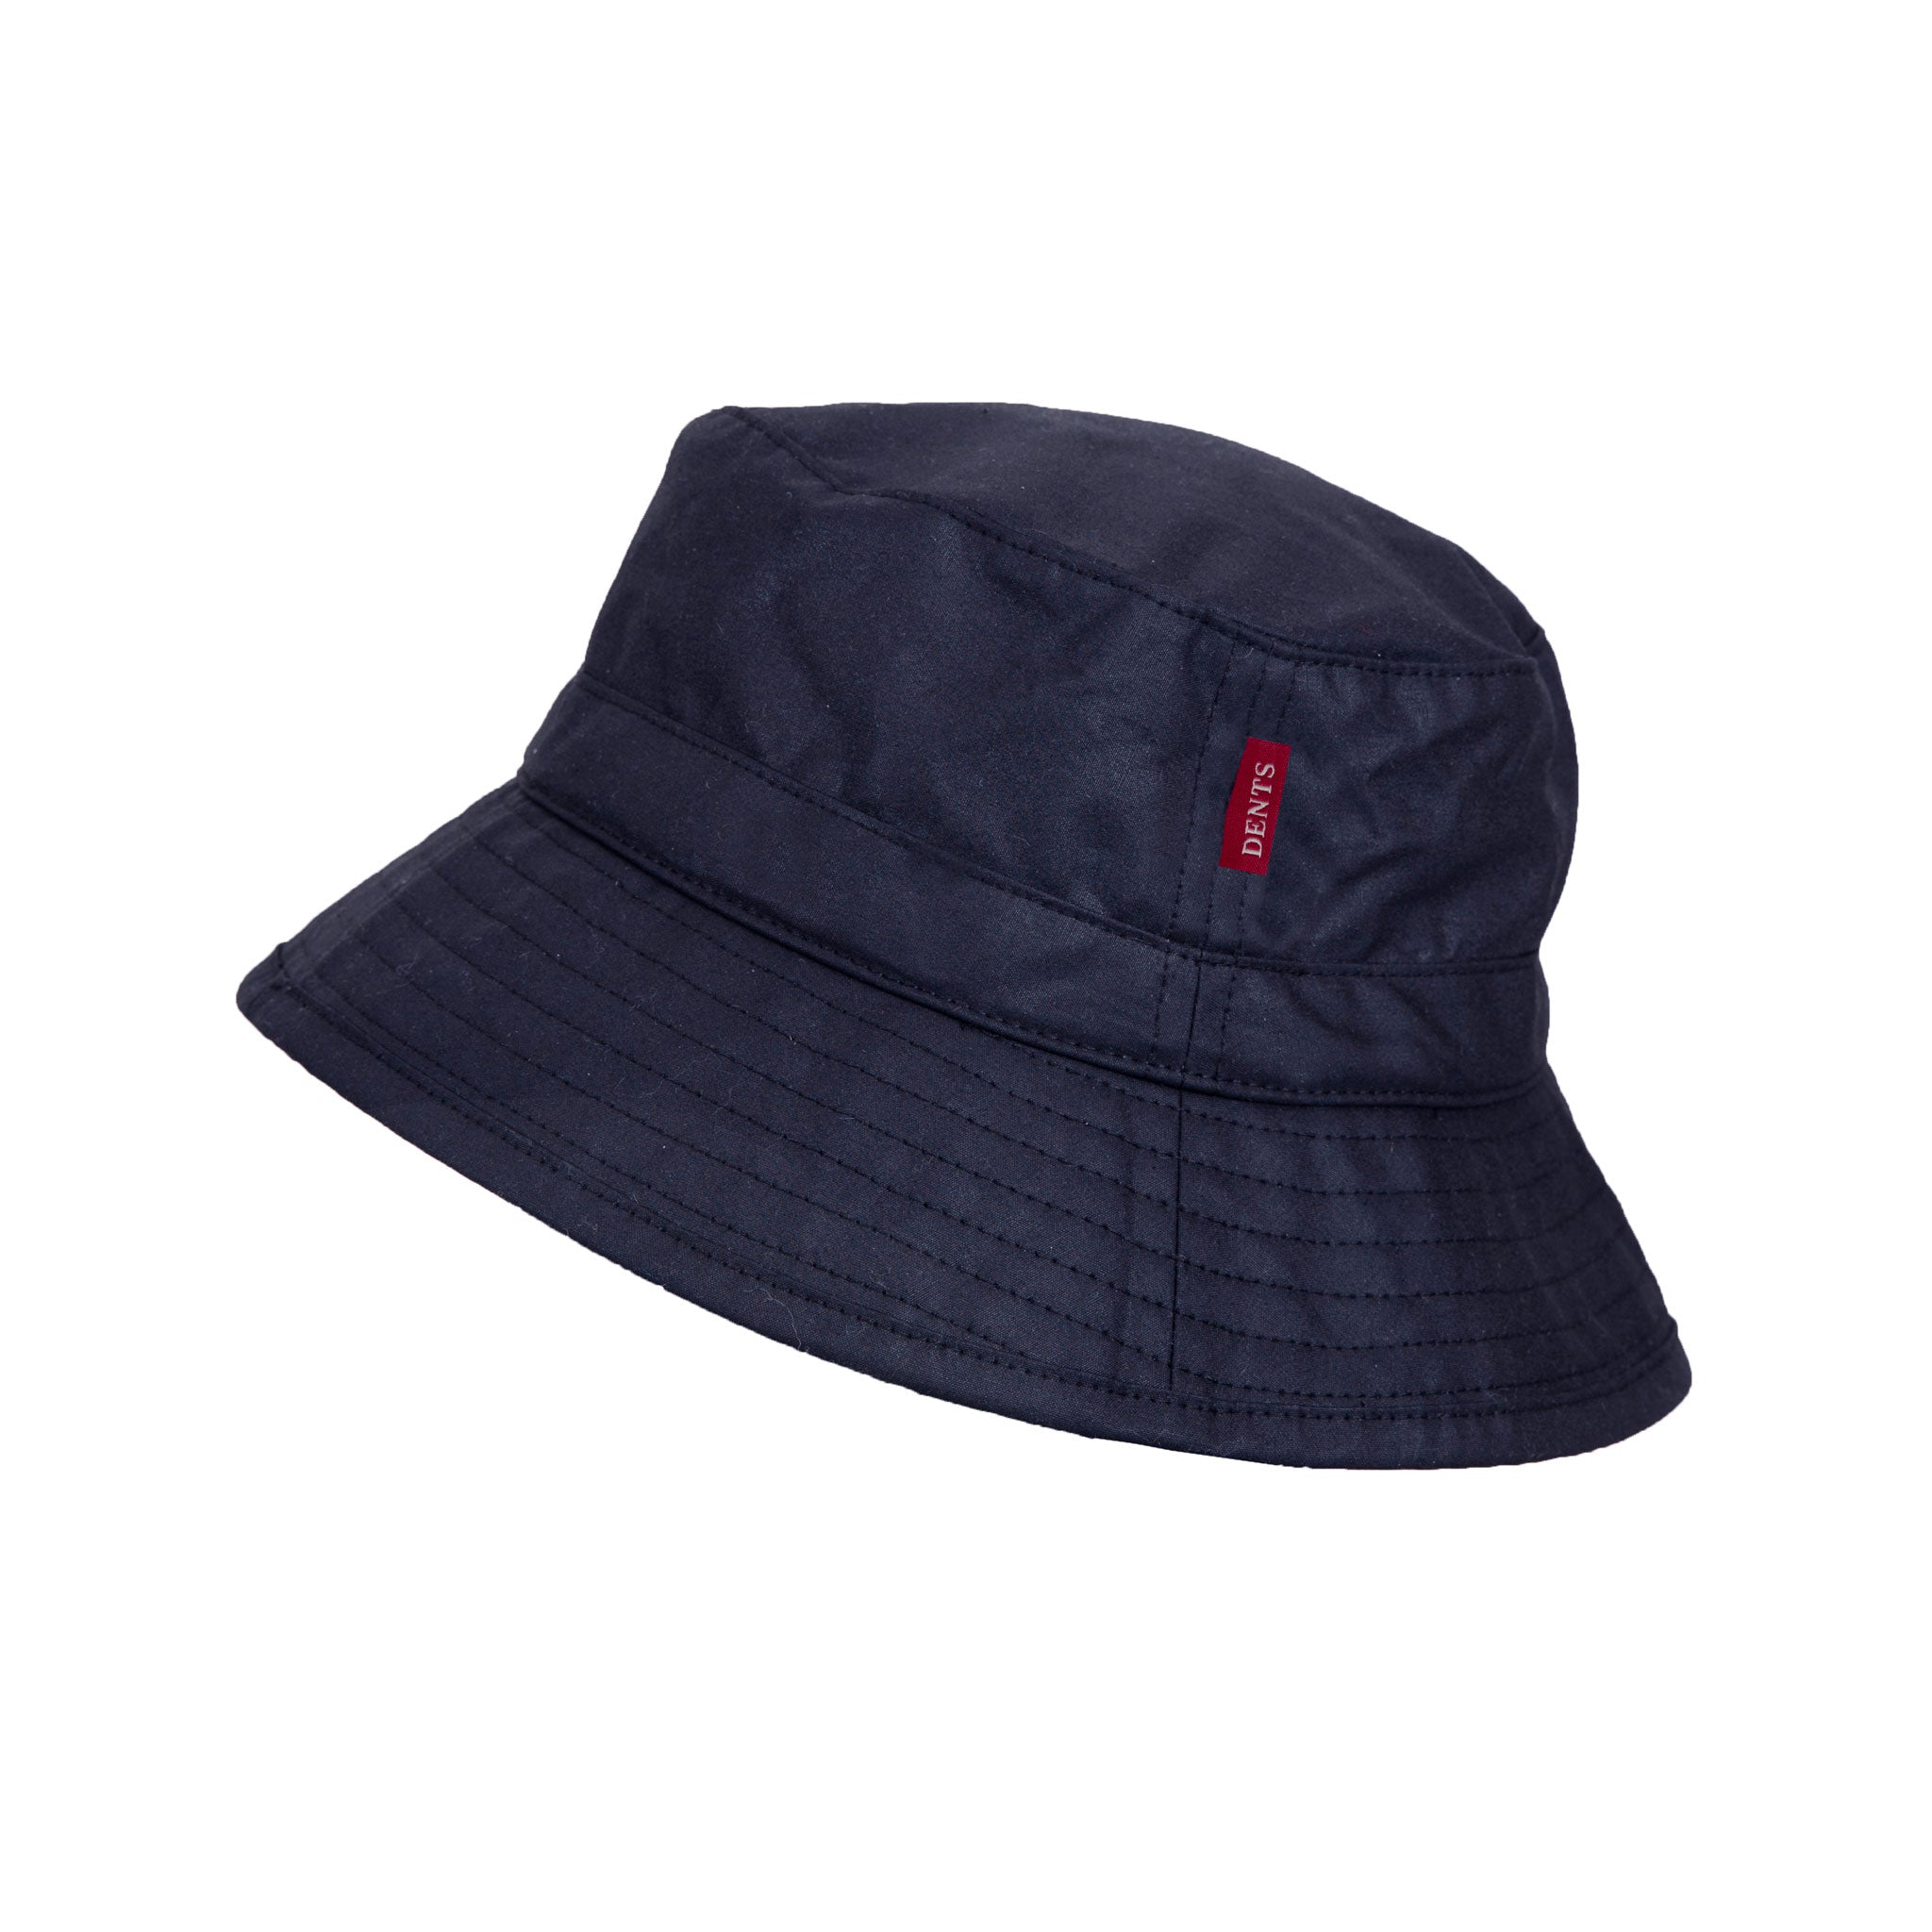 Time To Shine - Straw Bucket Hat for Women